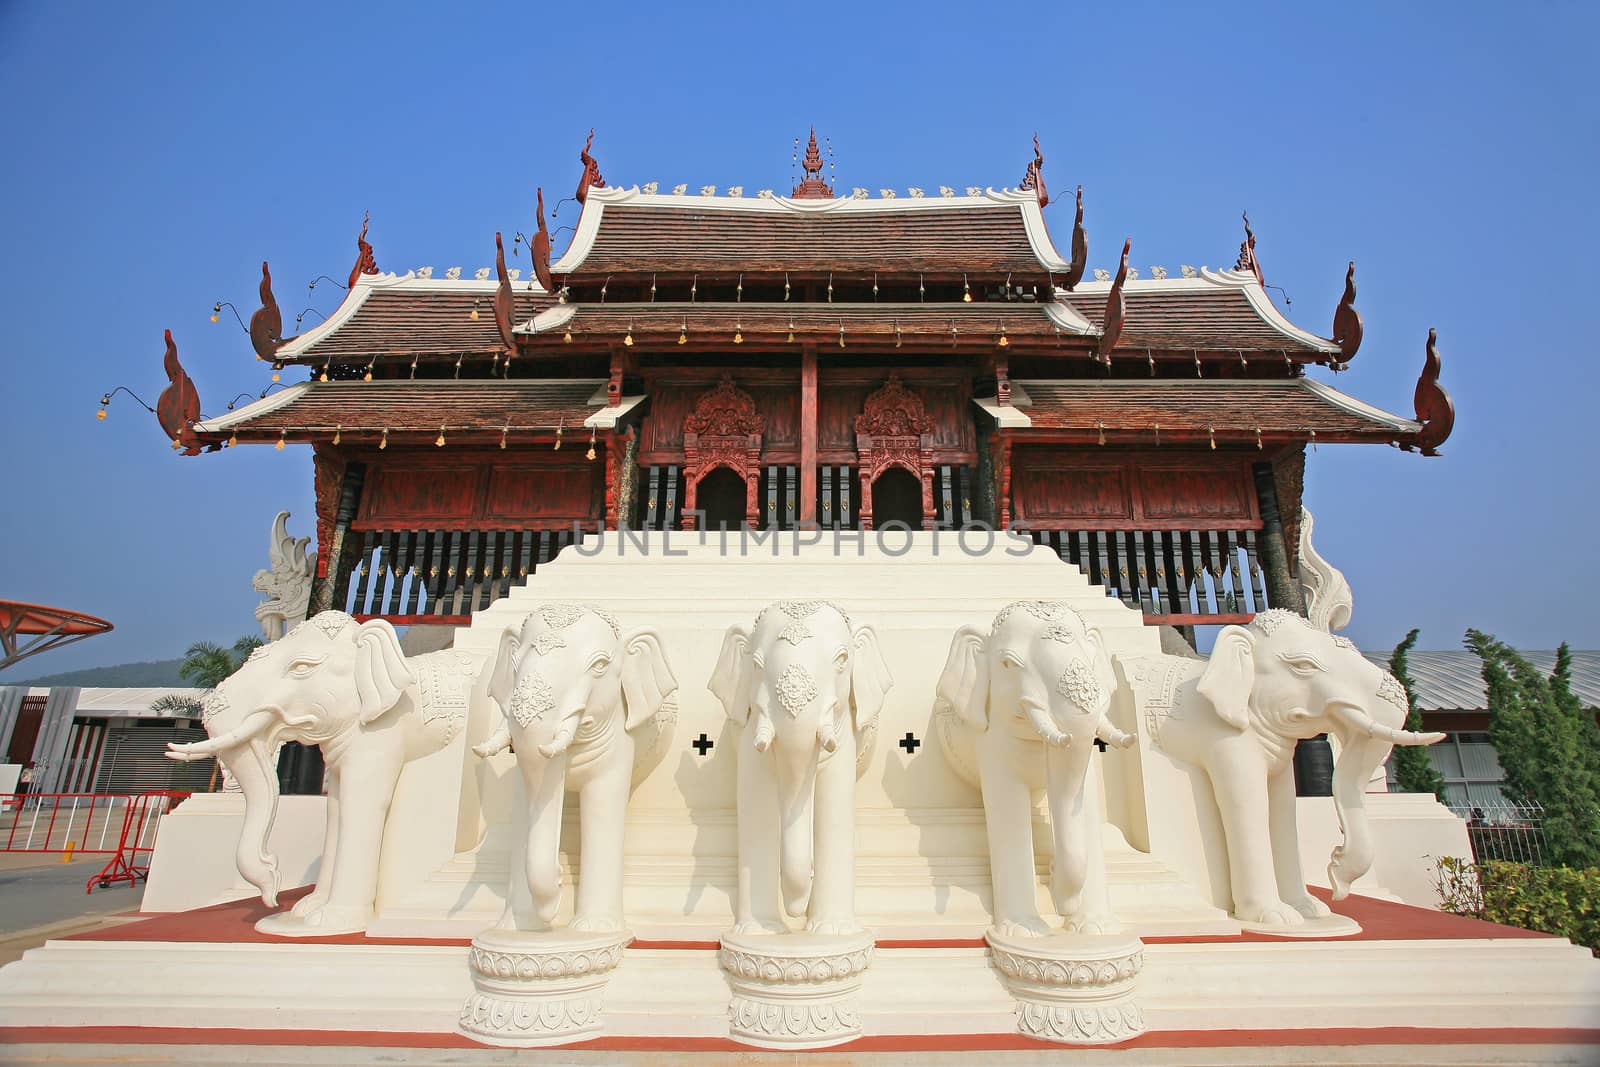 The white stucco elephant sculptur in Royal flora expo ,Chaingma by think4photop